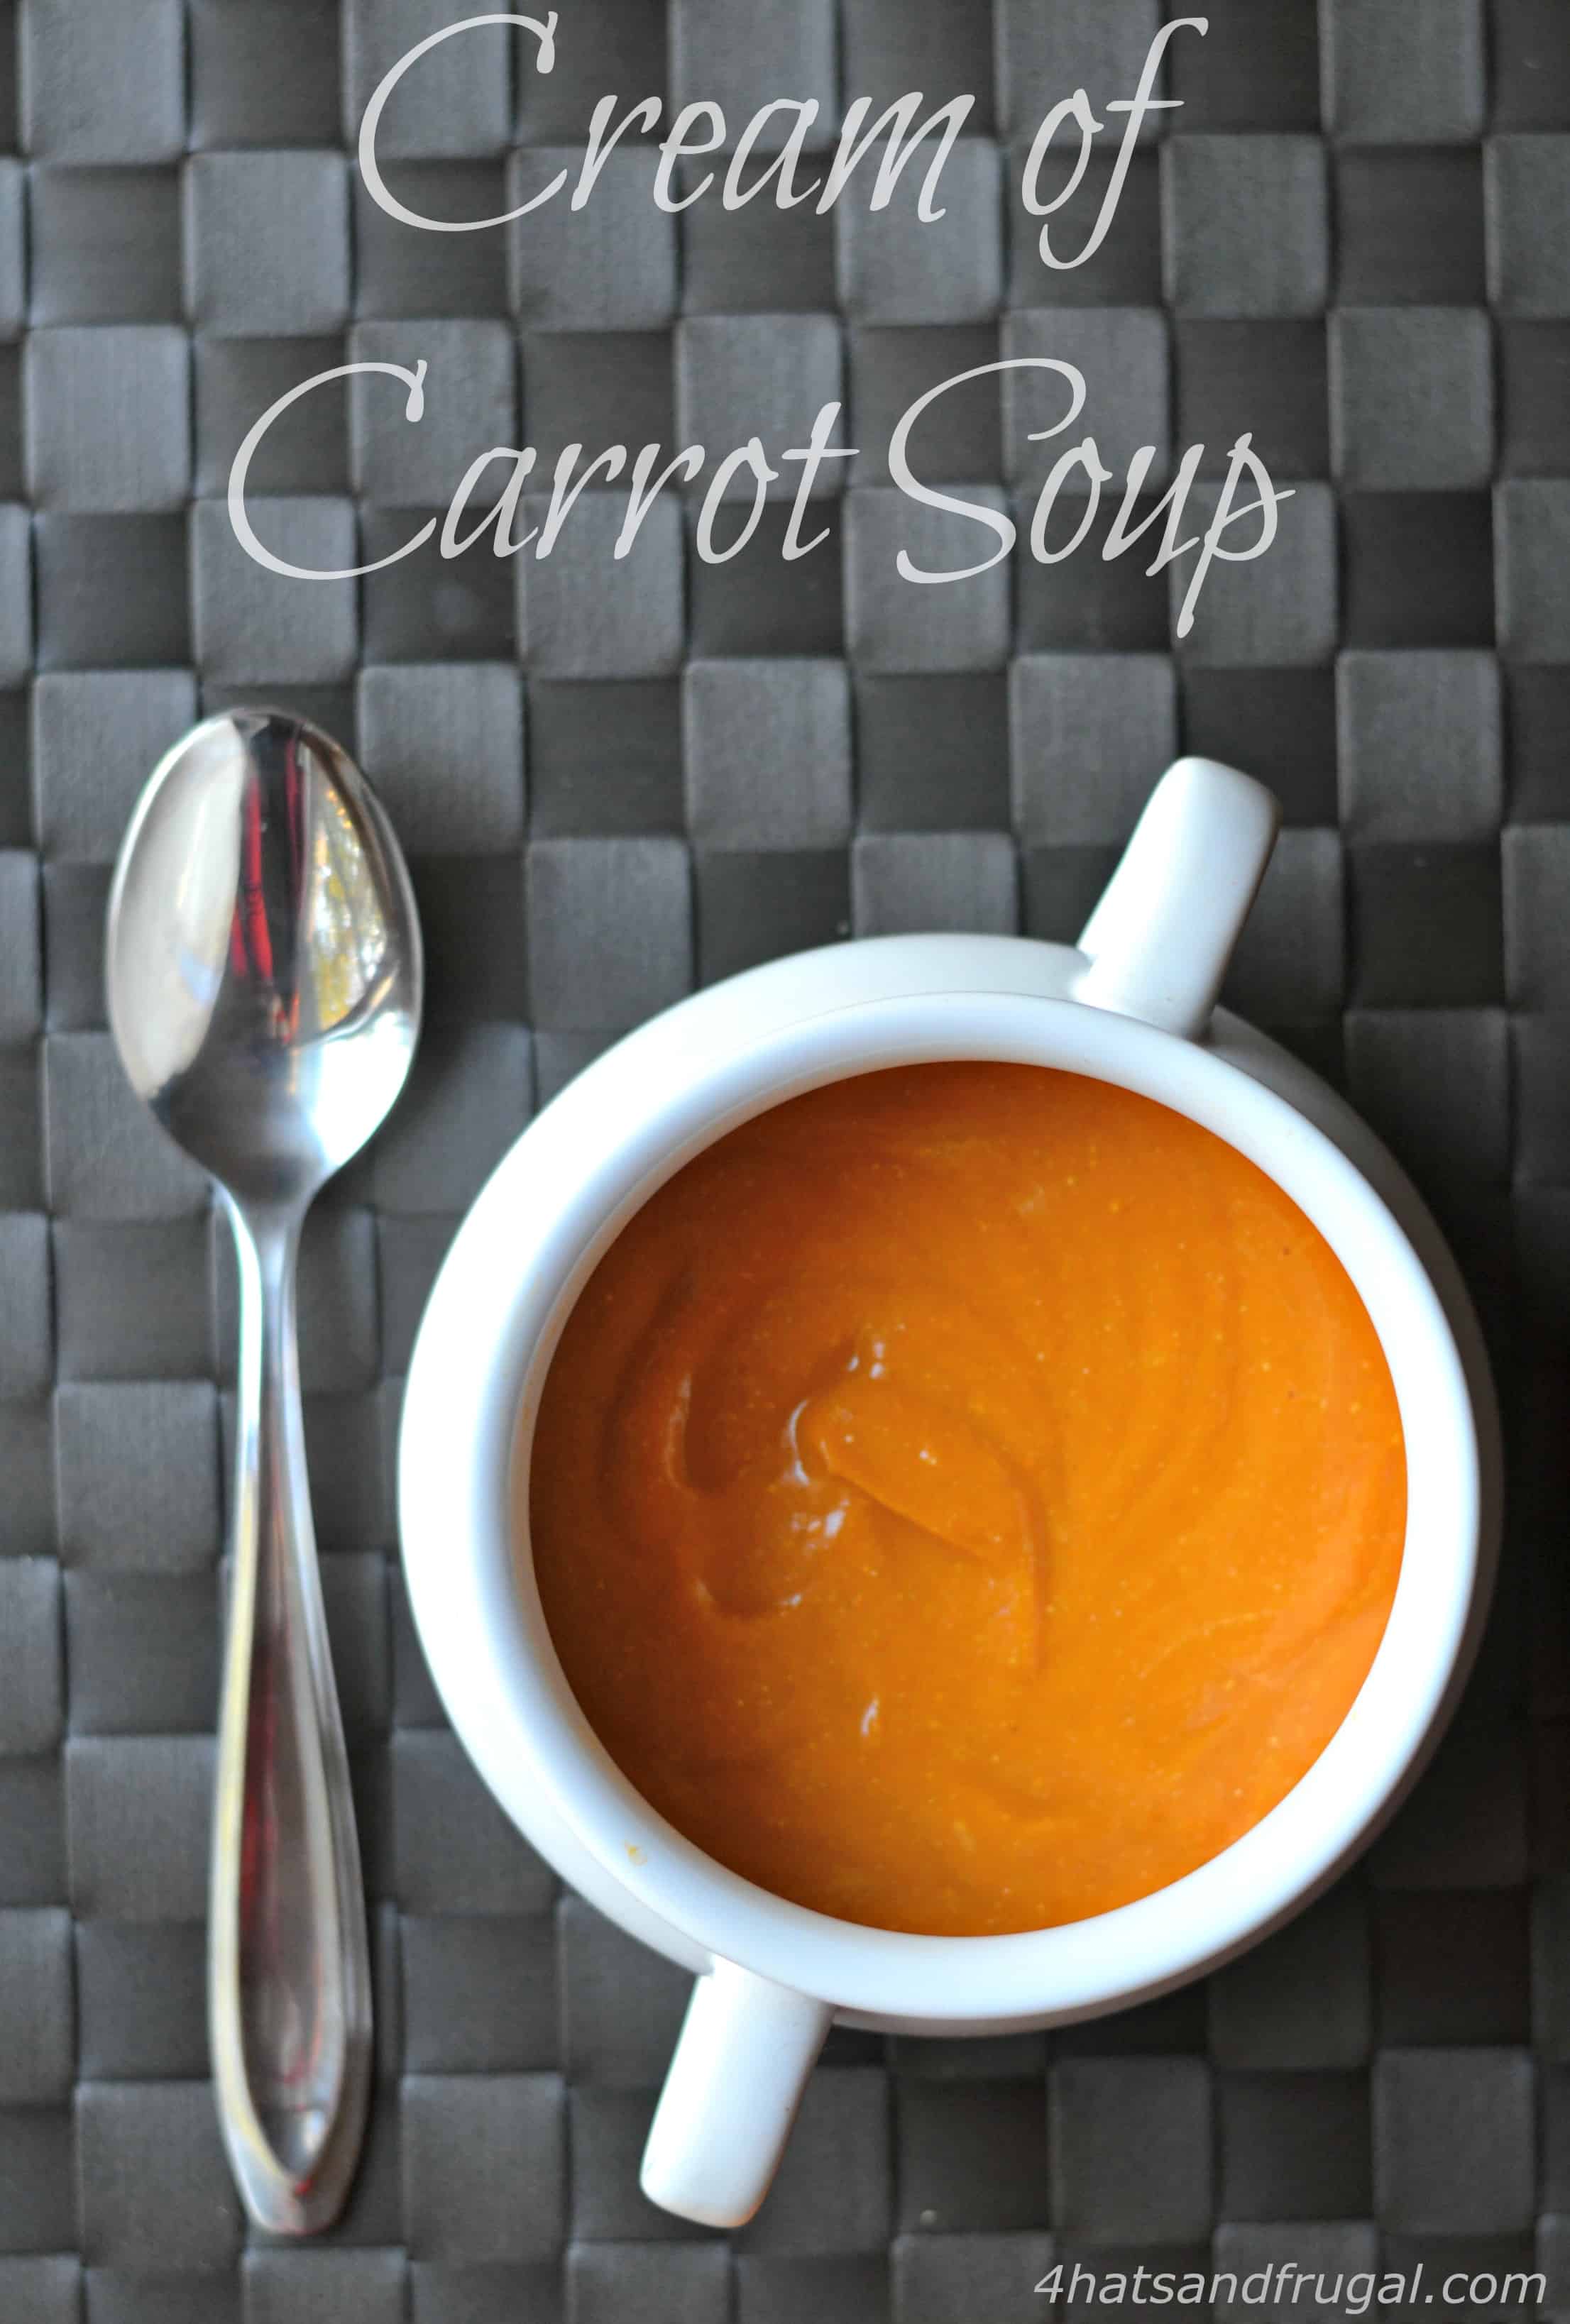 This cream of carrot soup has a homemade taste, but can be made in just 15 minutes! Check out the protein-packed secret ingredient.